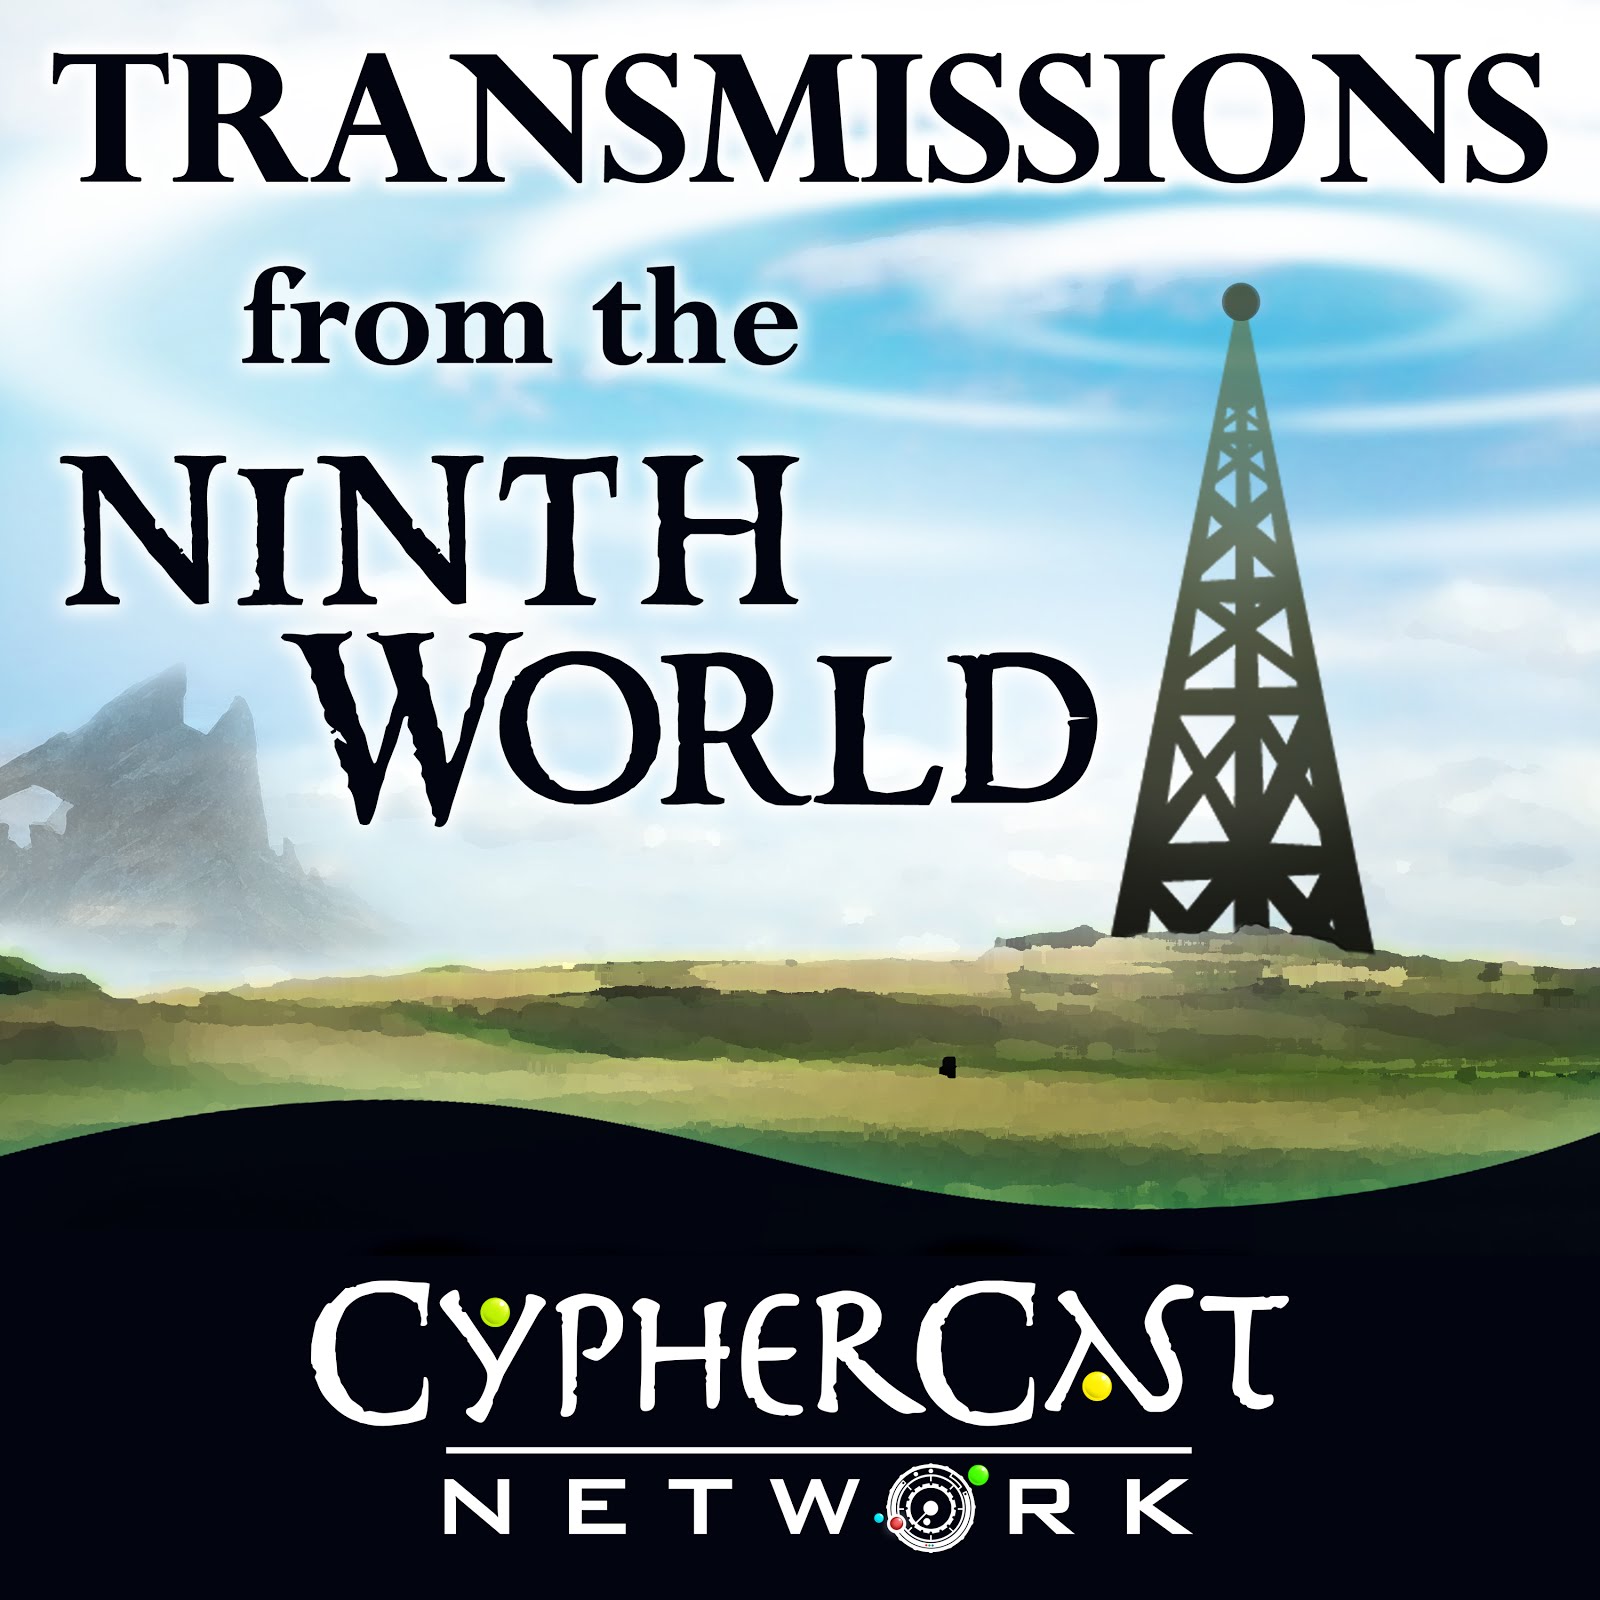 Transmissions from the Ninth World